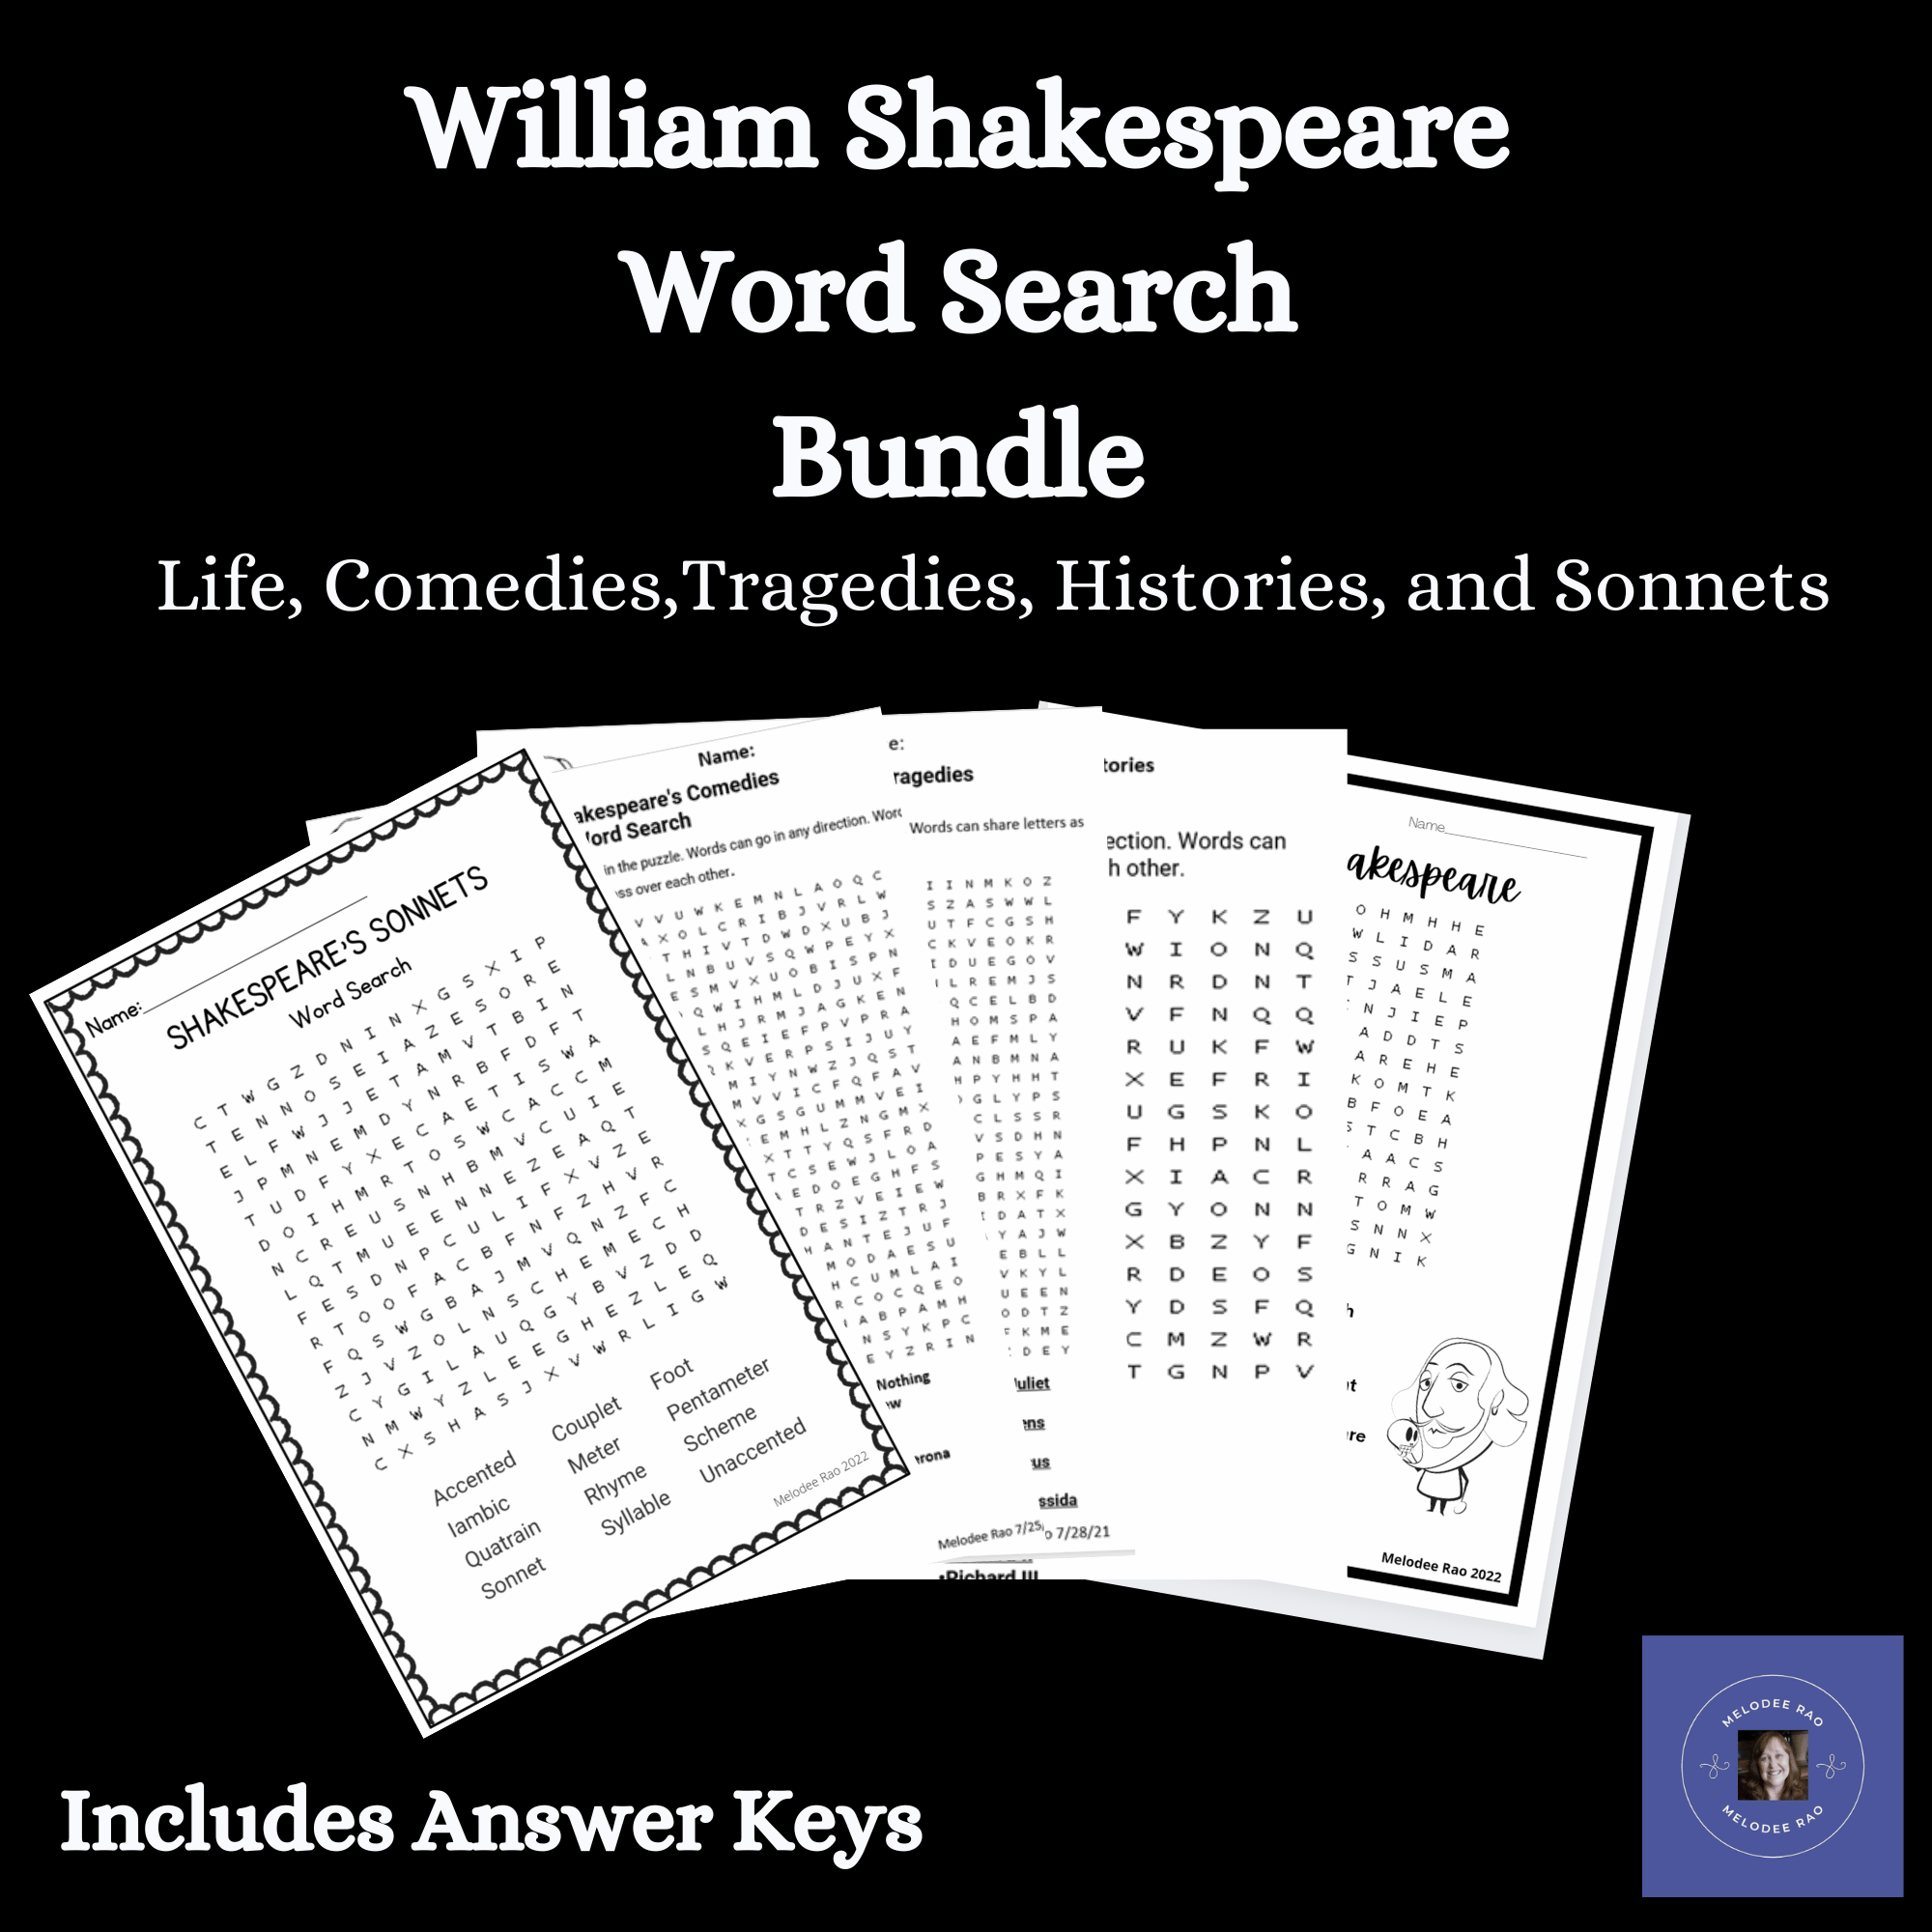 William Shakespeare Word Search Bundle